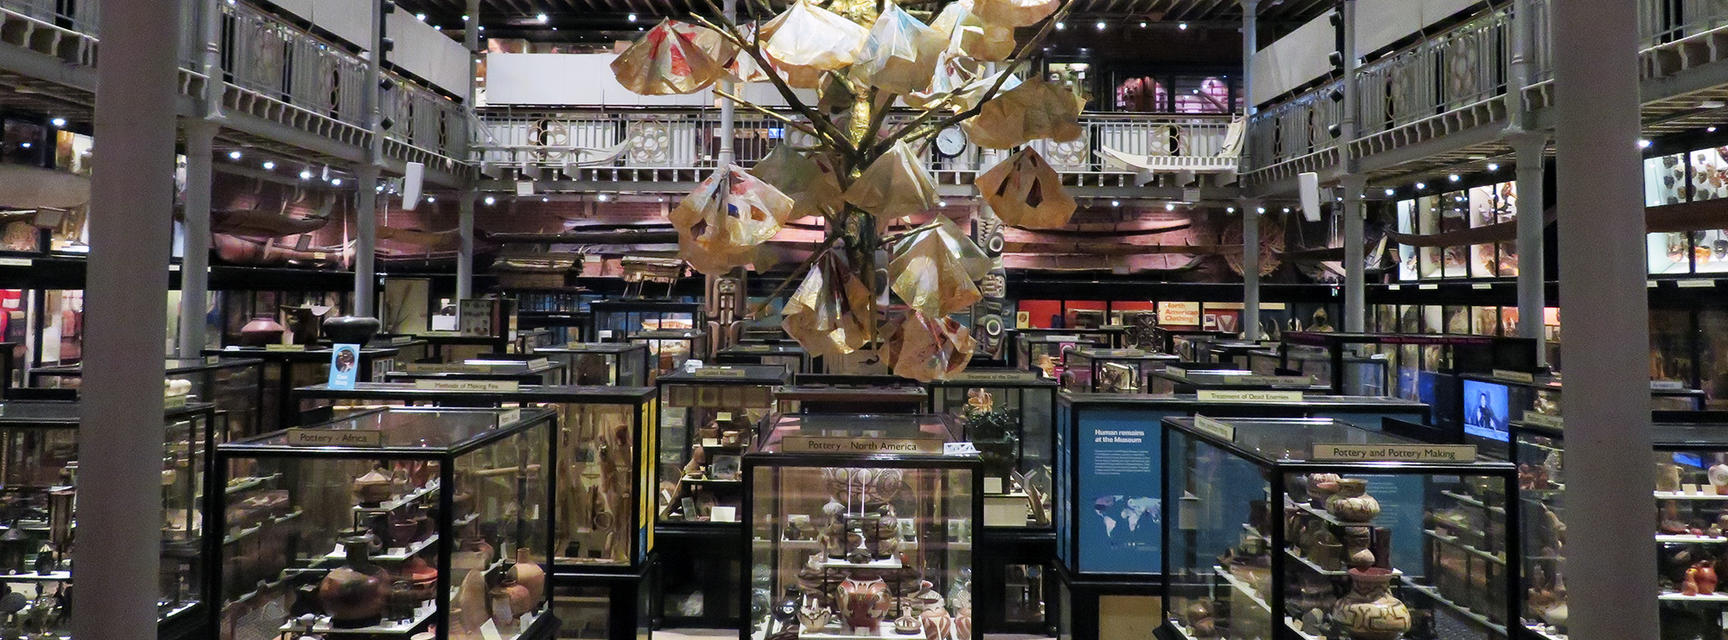 View of branching paper sculpture hung above glass cases filled with objects.